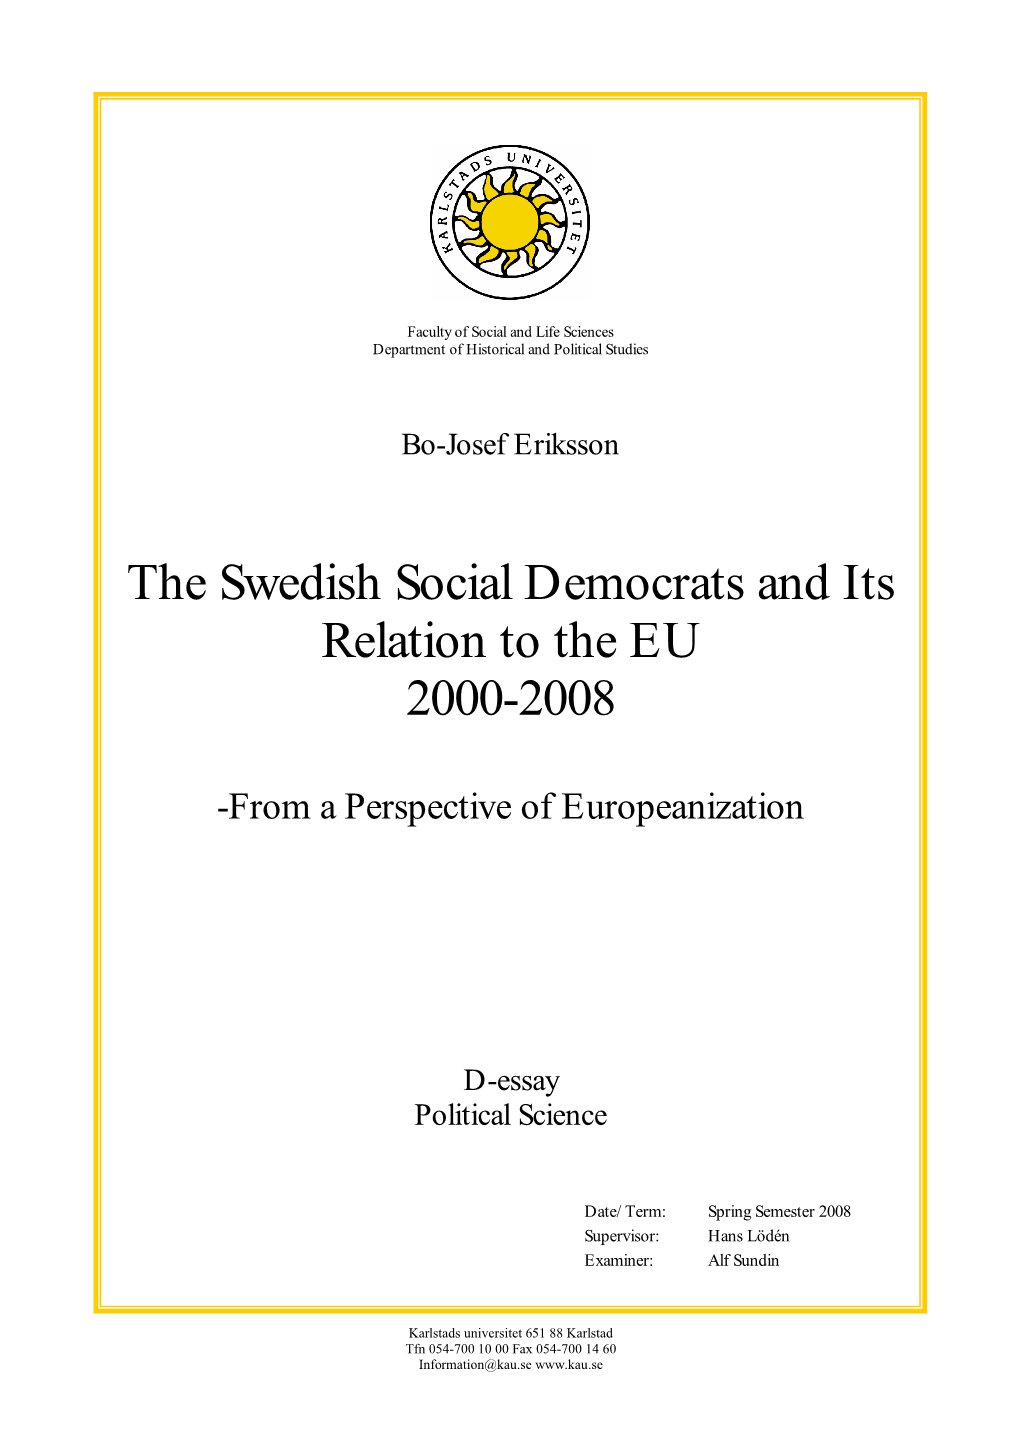 The Swedish Social Democrats and Its Relation to the EU 2000-2008